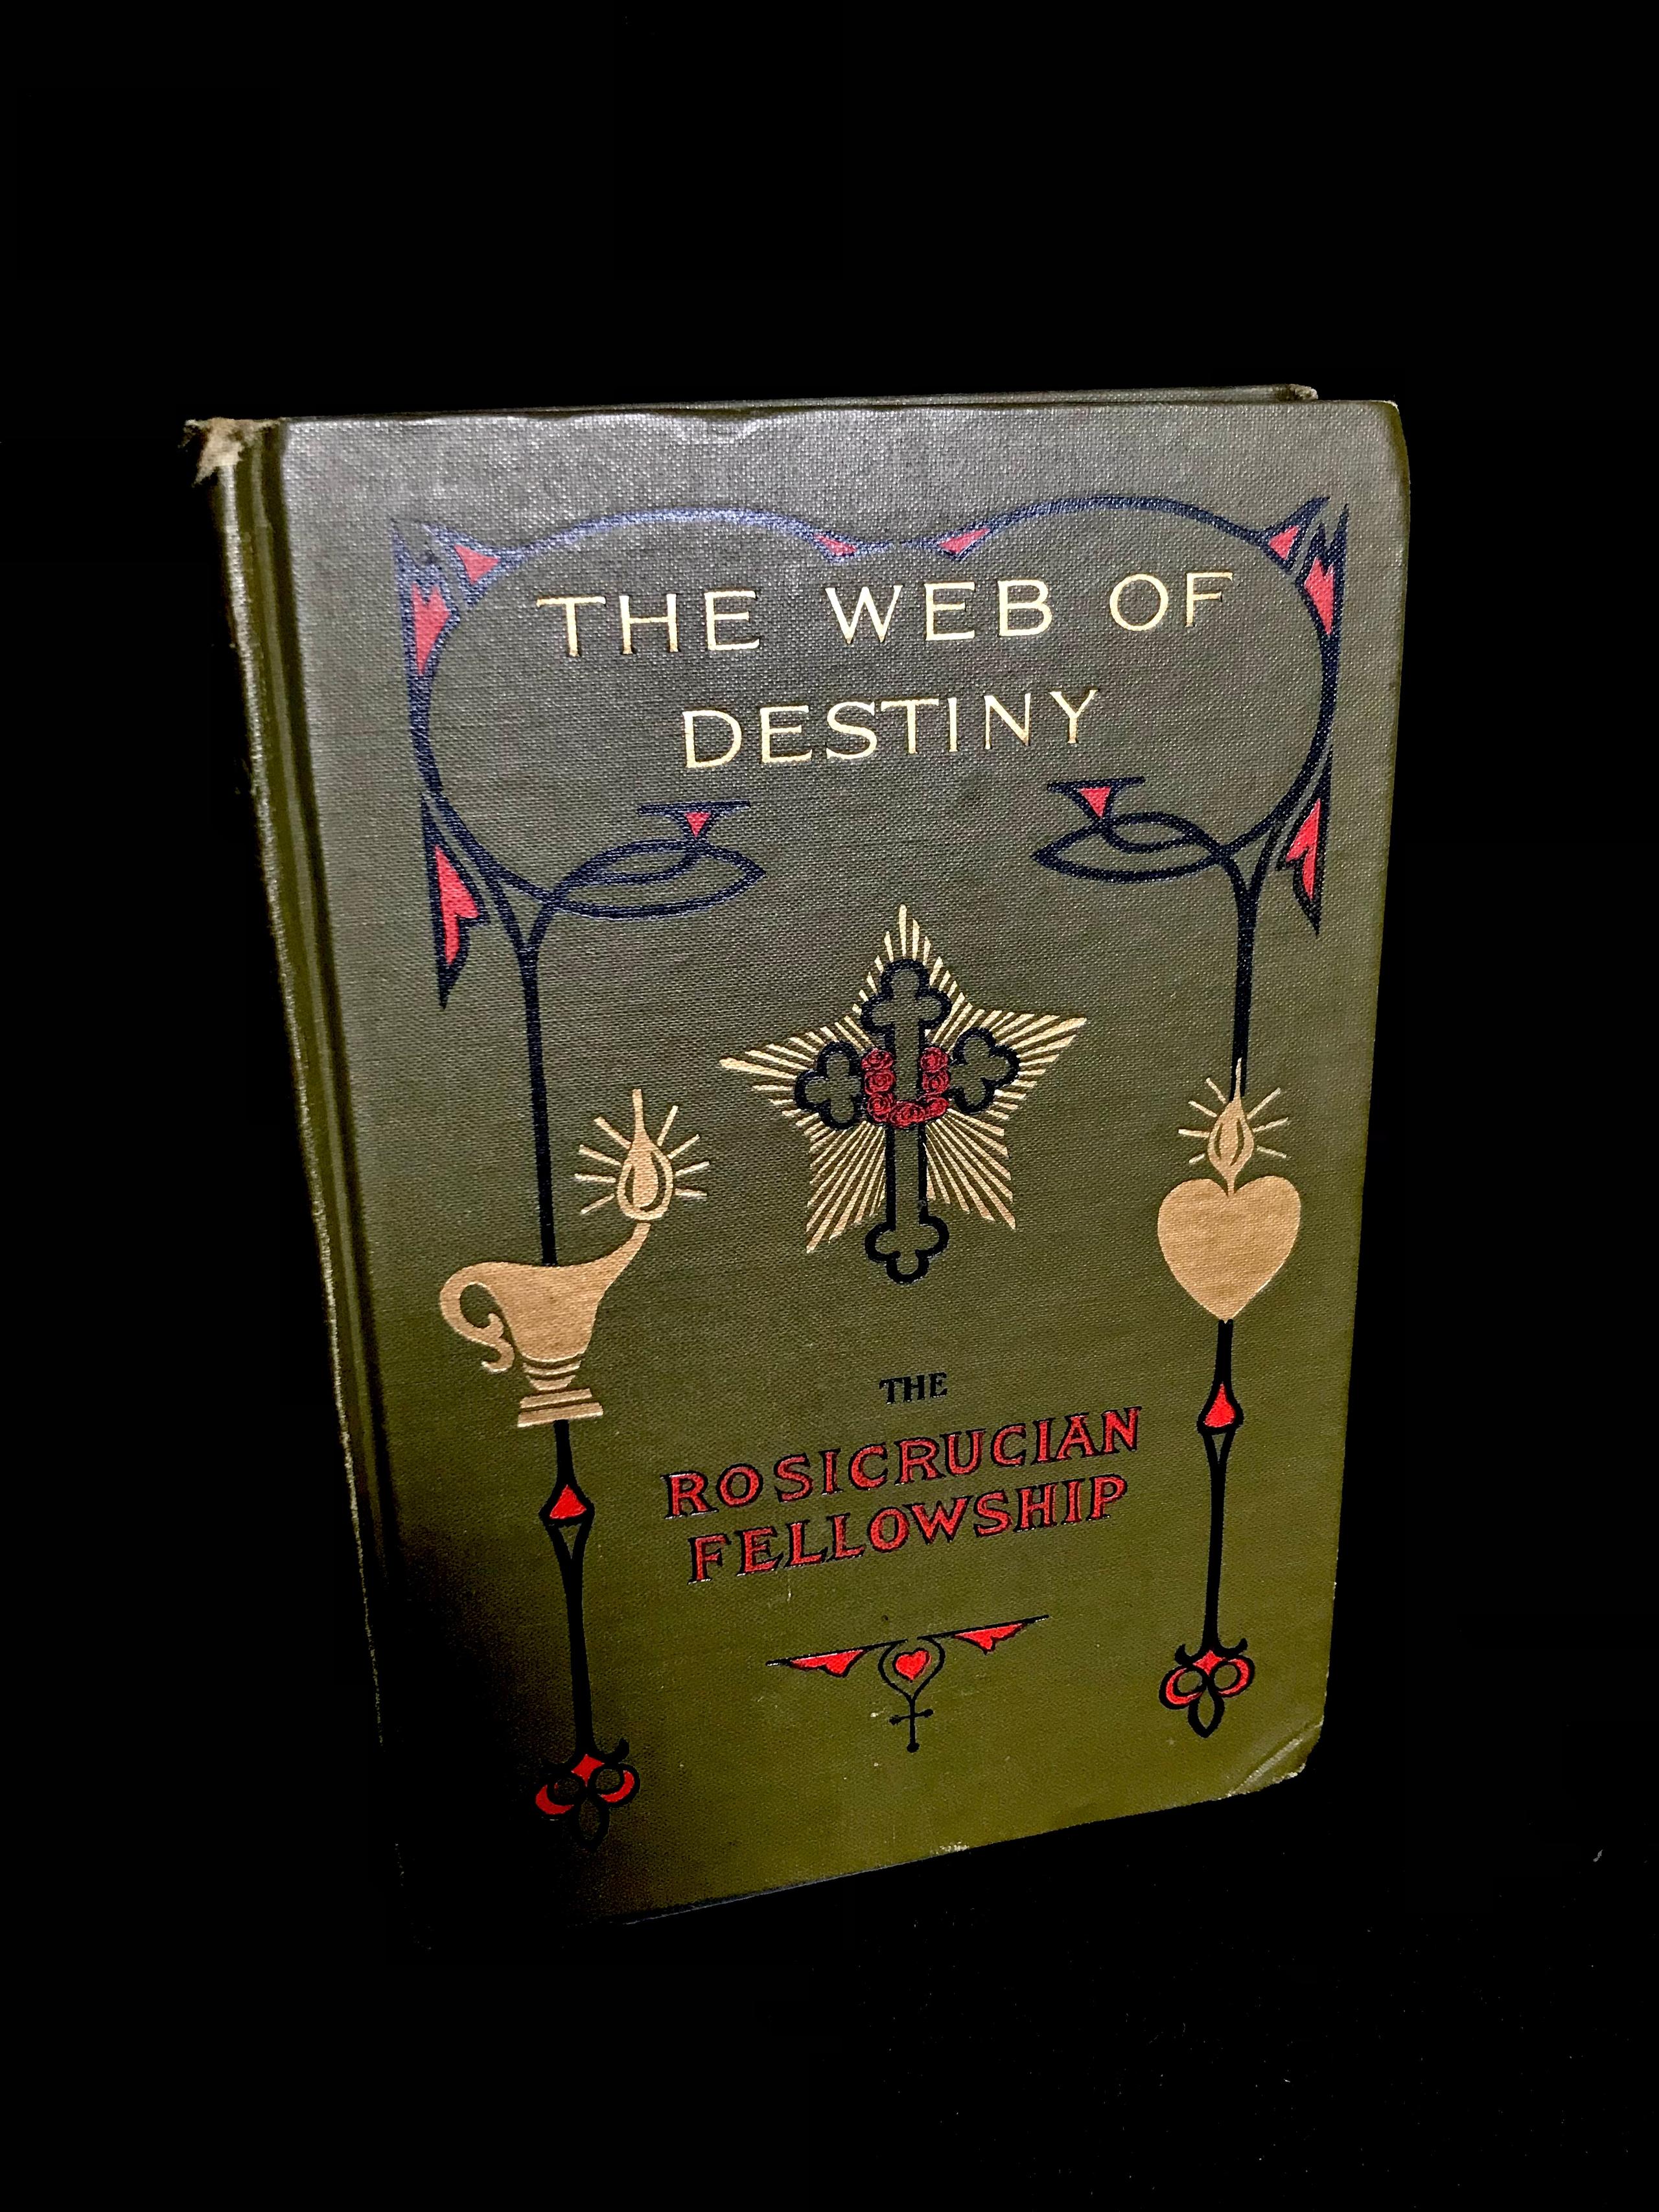 The Web Of Destiny by Max Heindel